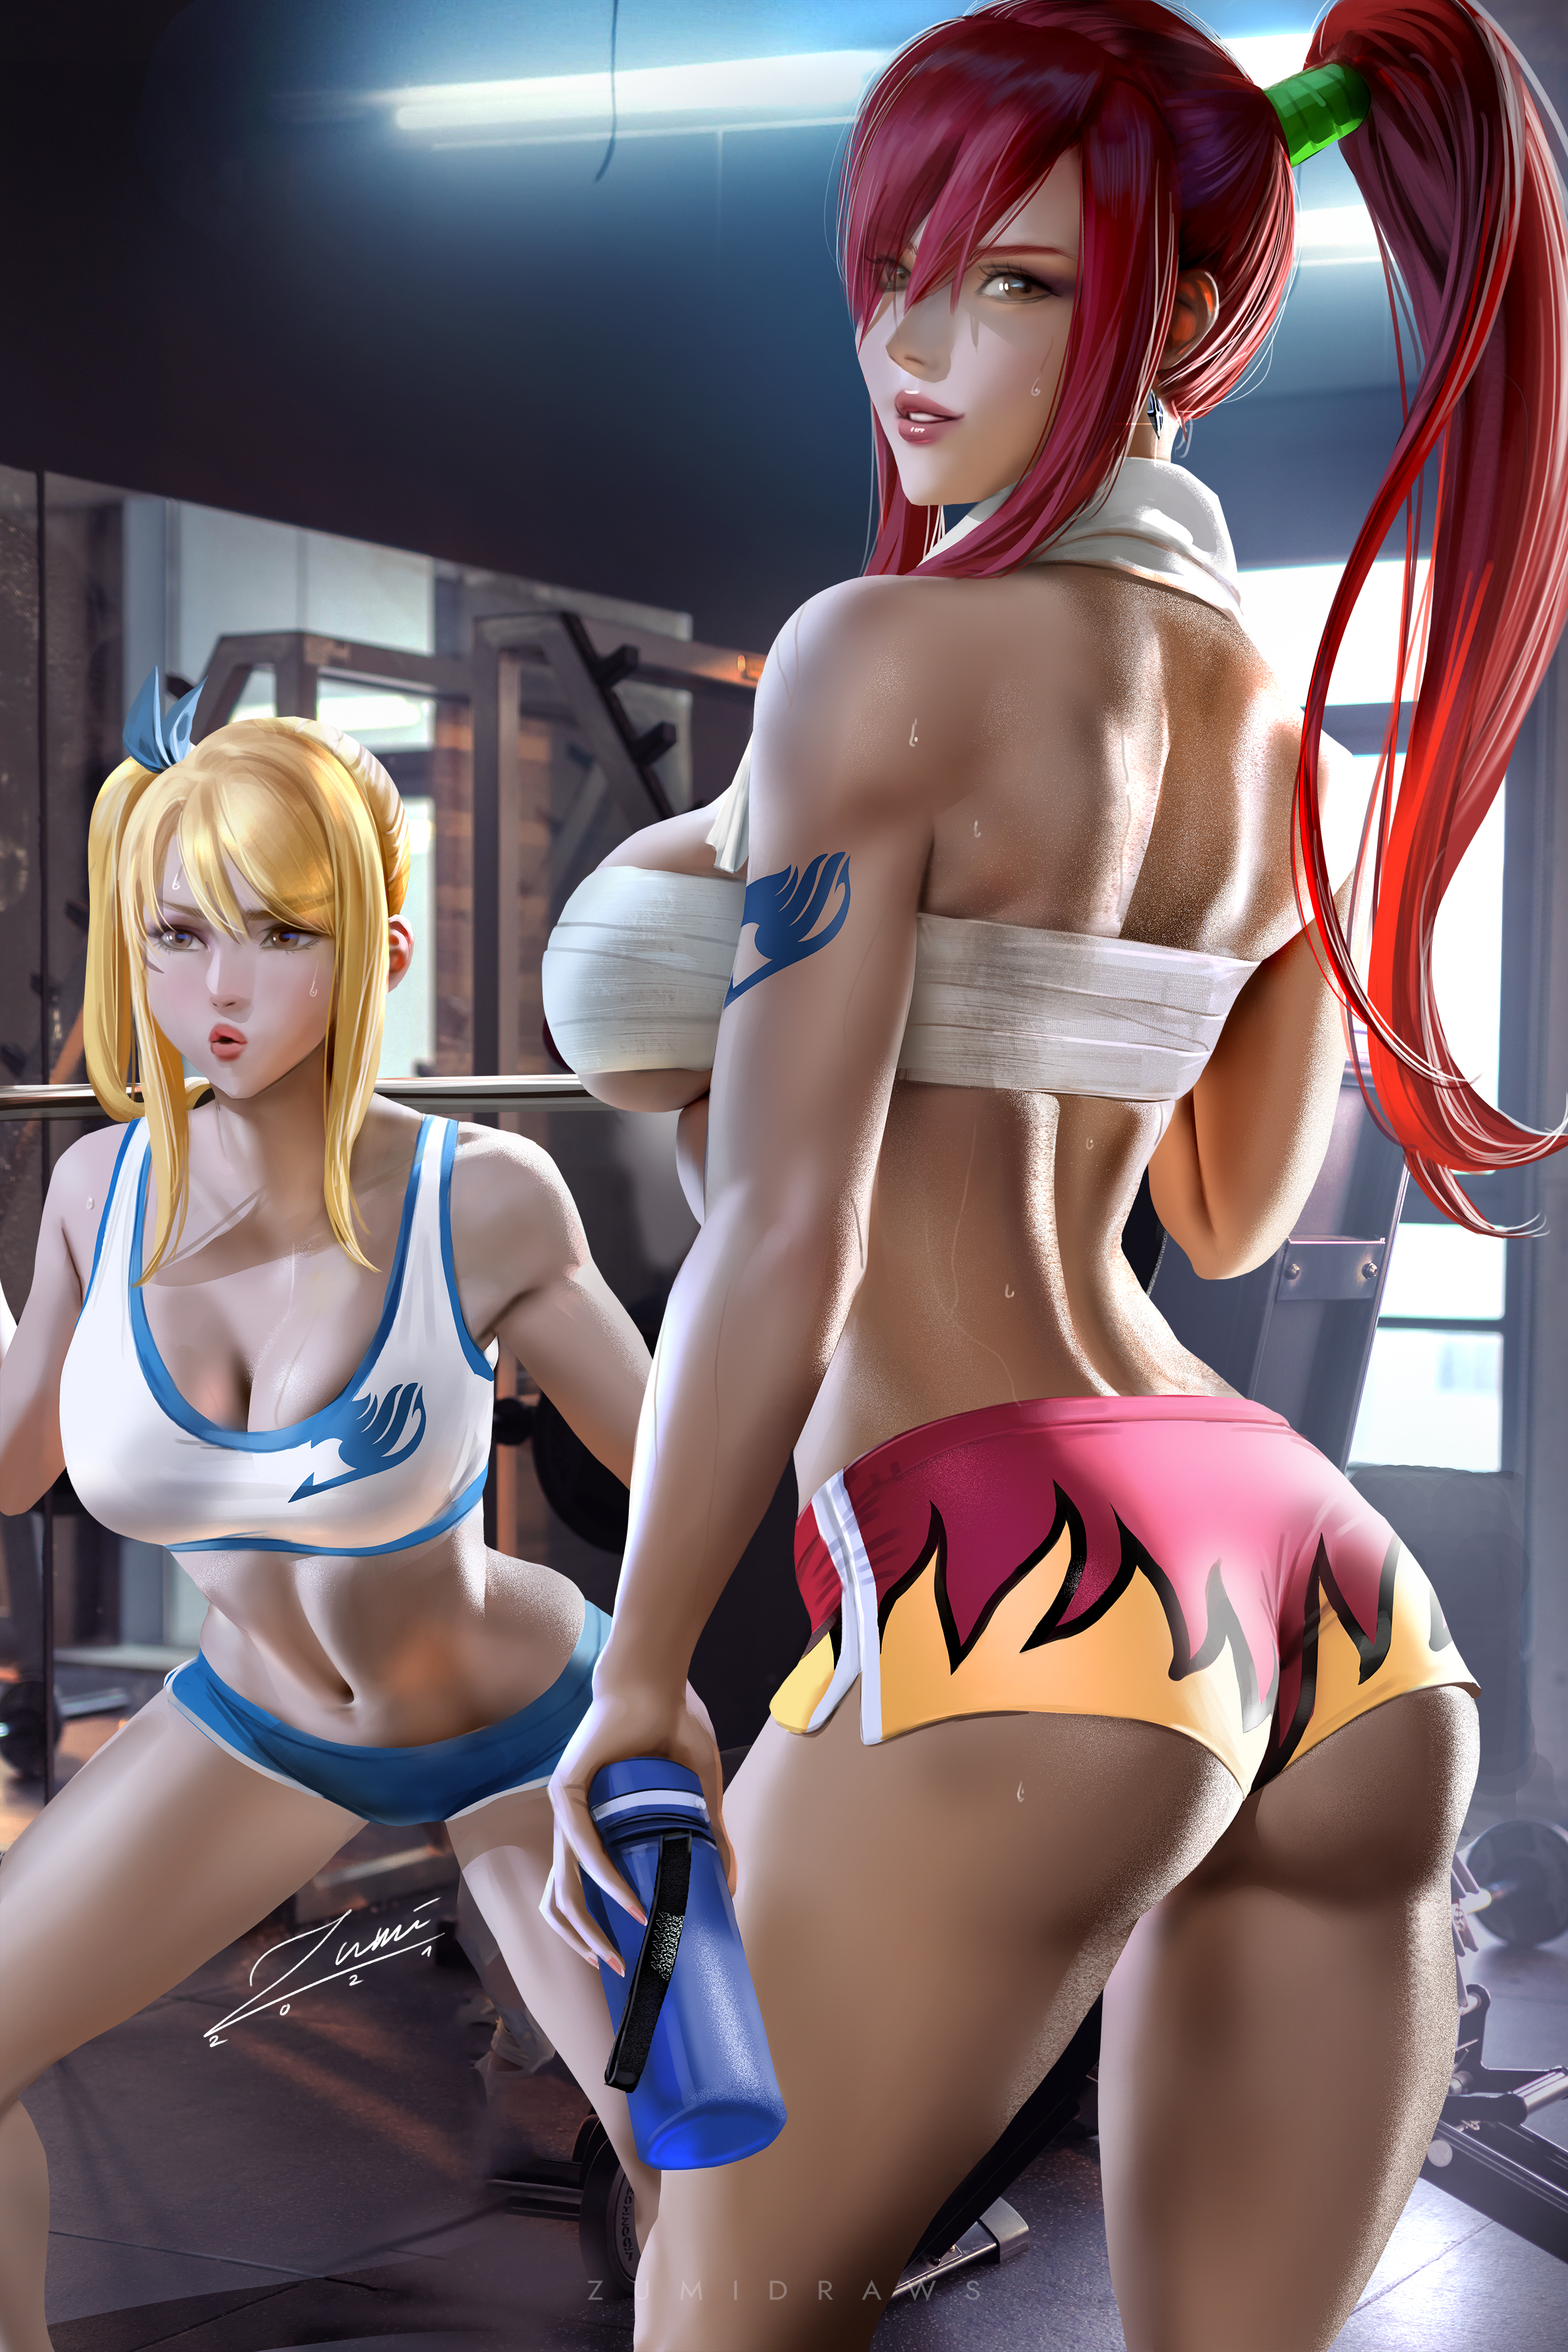 Anime 2339x3508 Heartfilia Lucy  Scarlet Erza Fairy Tail anime anime girls Side ponytail ponytail blonde redhead gyms exercise sweat gym clothes short tops sarashi short shorts tight shorts ass looking at viewer tattoo artwork drawing digital art illustration fan art Zumi signature